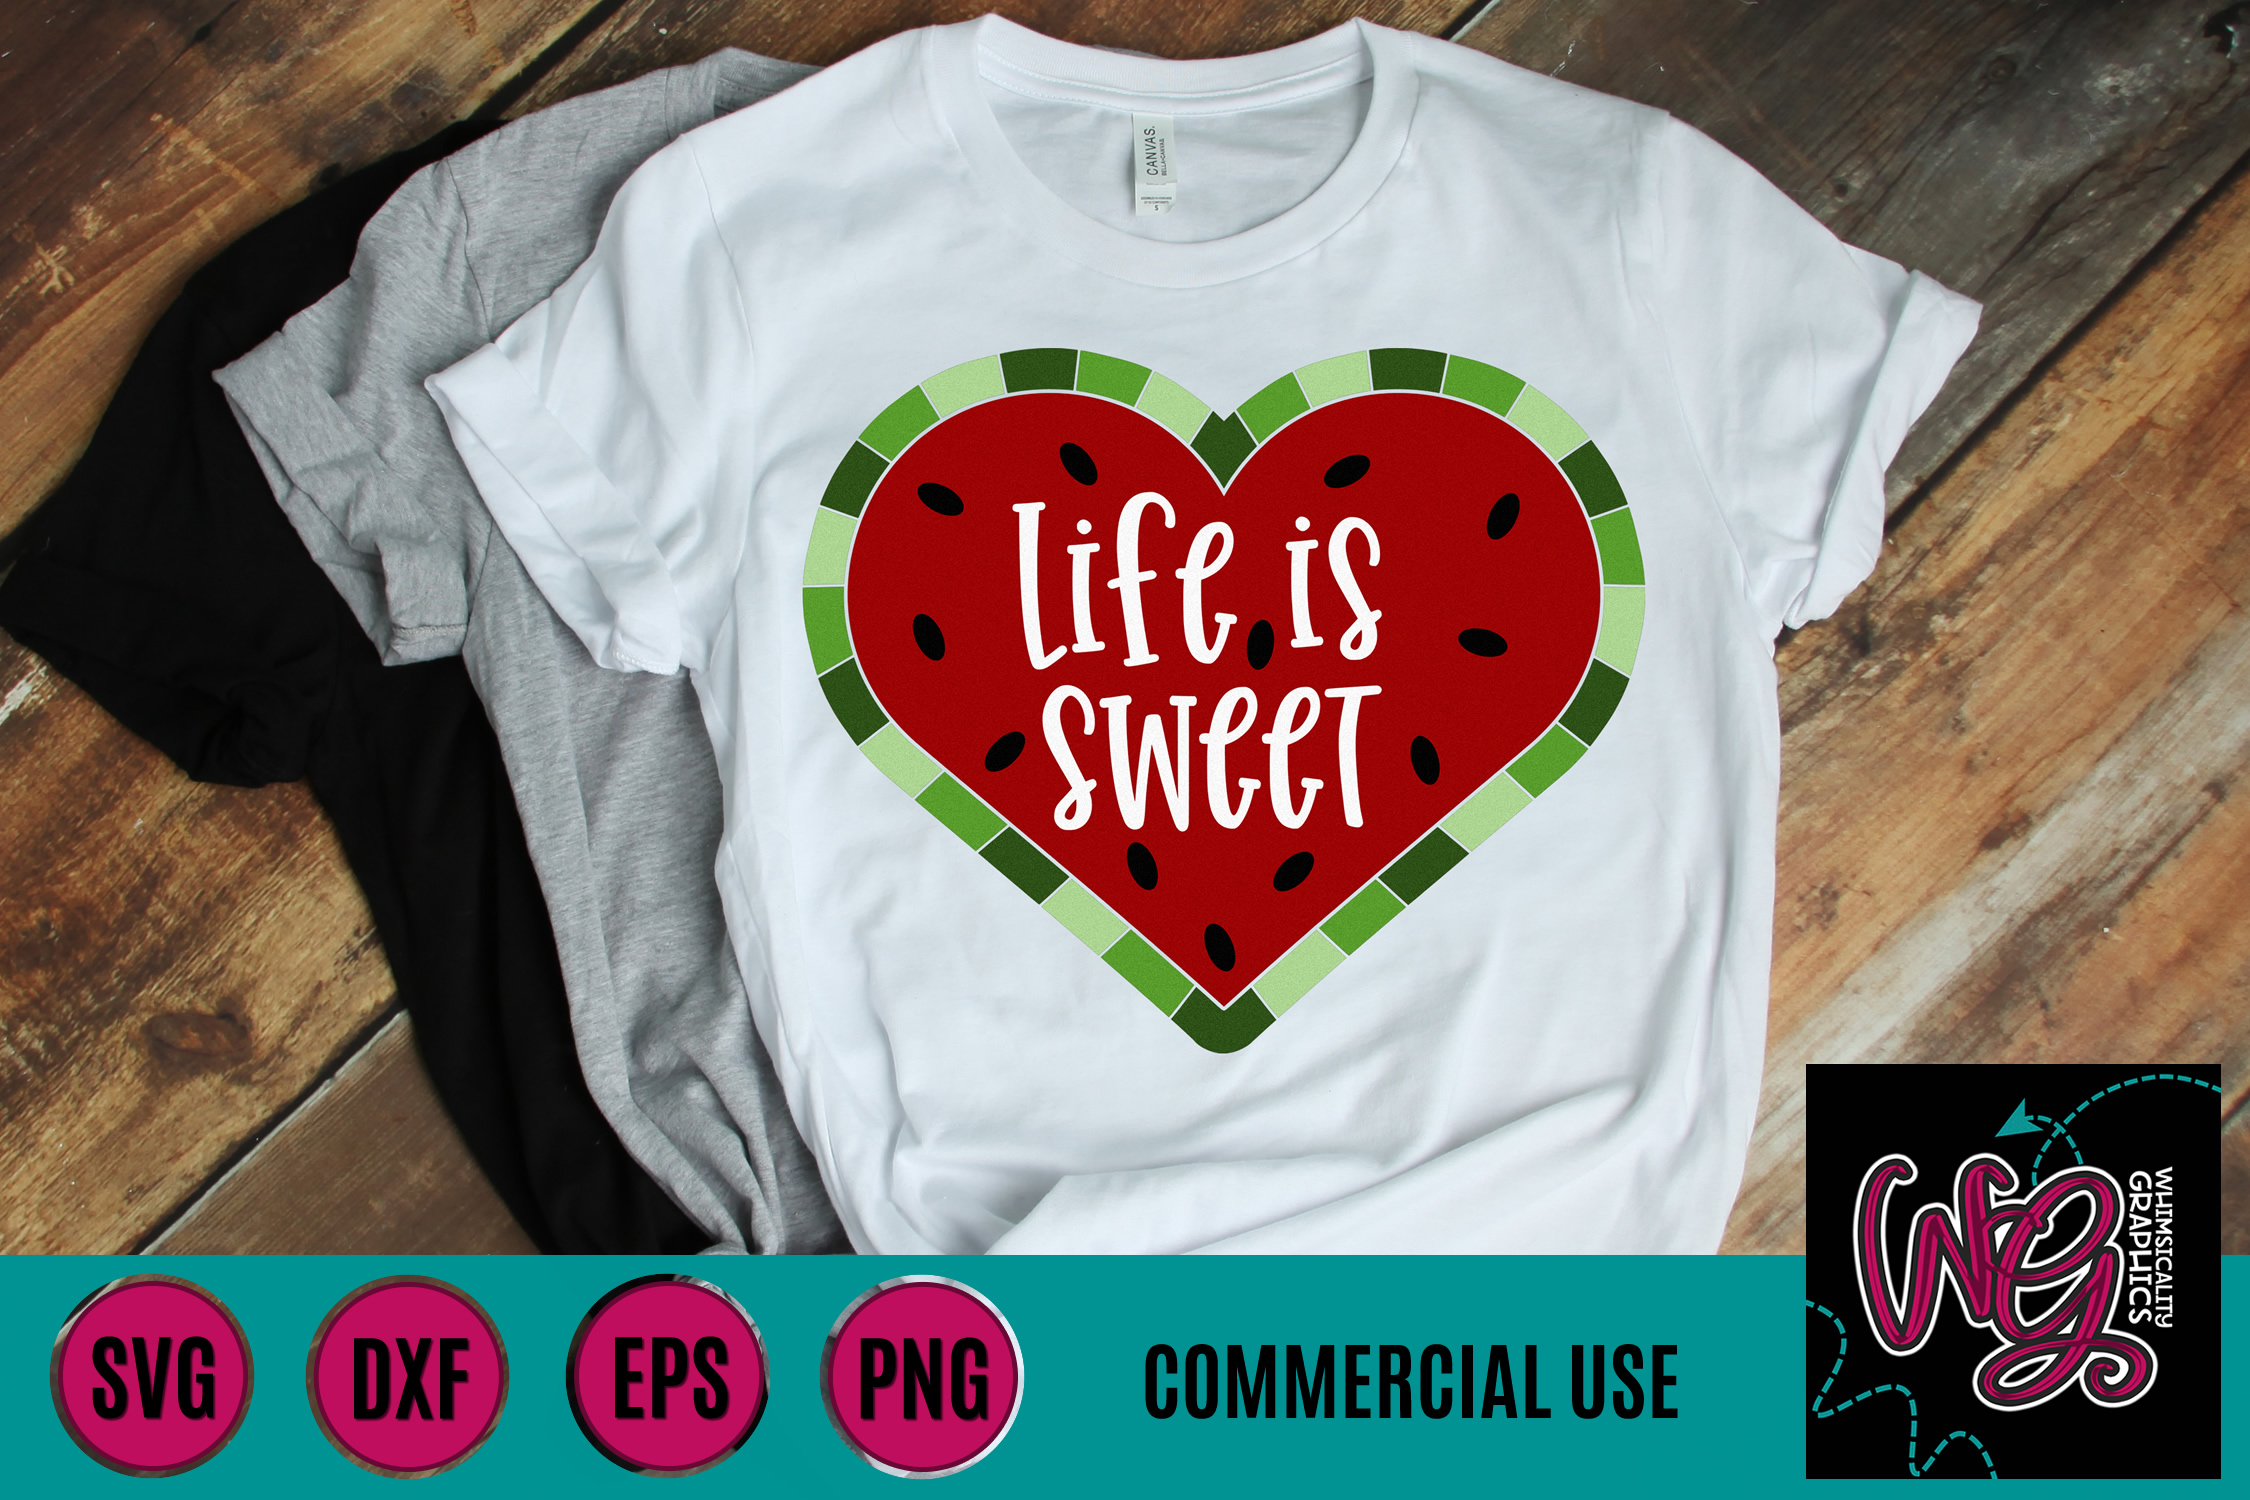 Download Life is Sweet Watermelon Heart SVG, DXF, PNG, EPS